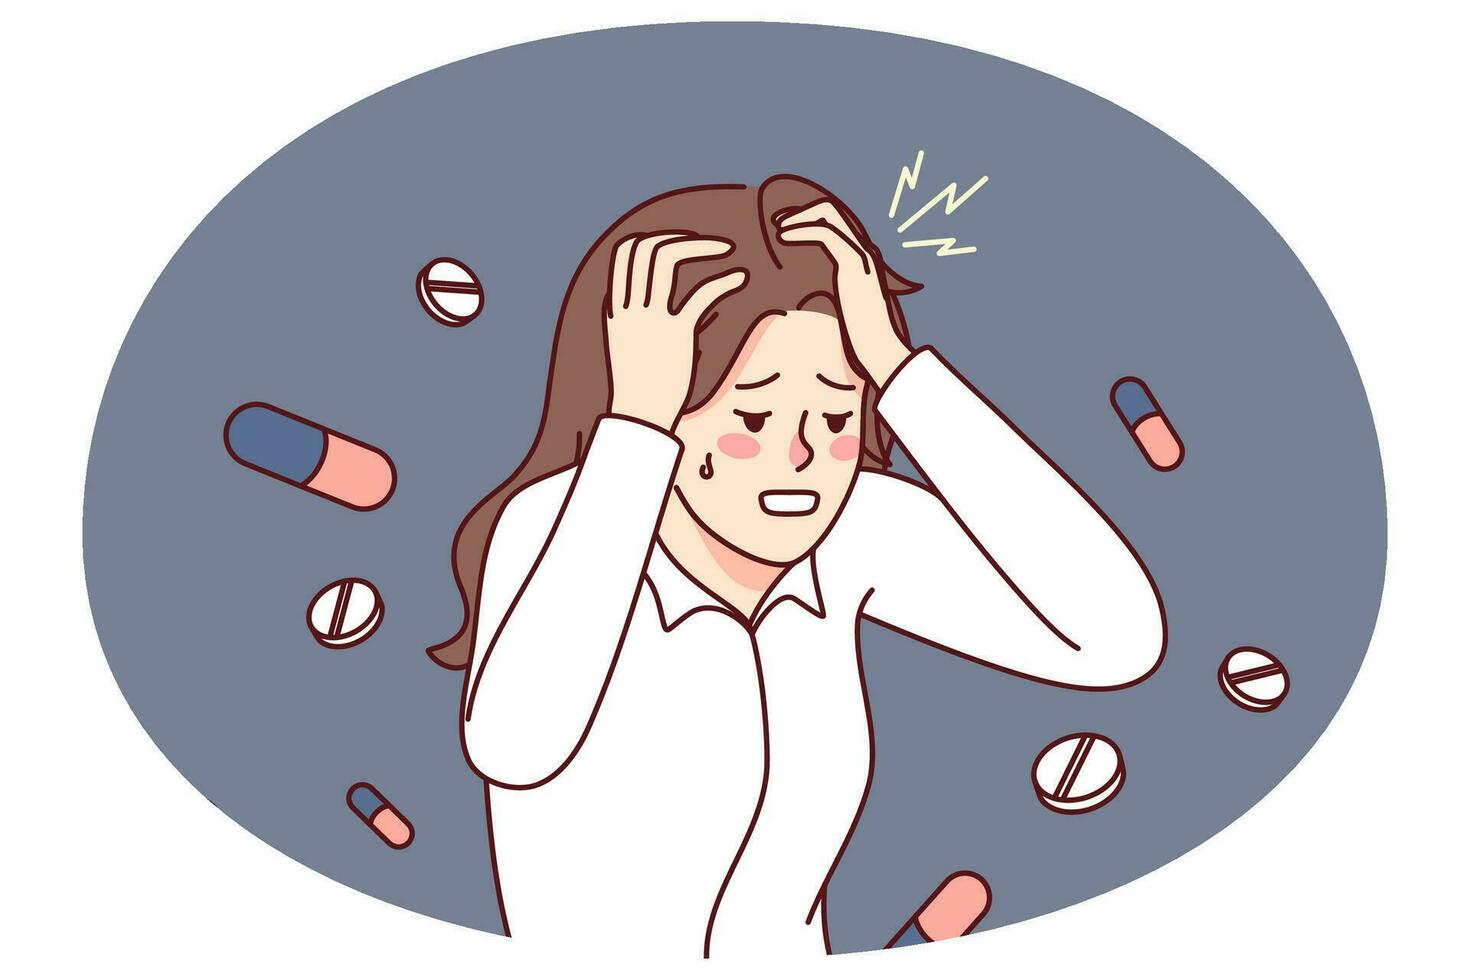 Unhealthy woman suffering from migraine need painkiller to relieve pain. Unwell female struggle with headache or dizziness. Healthcare and medication concept. Vector illustration.